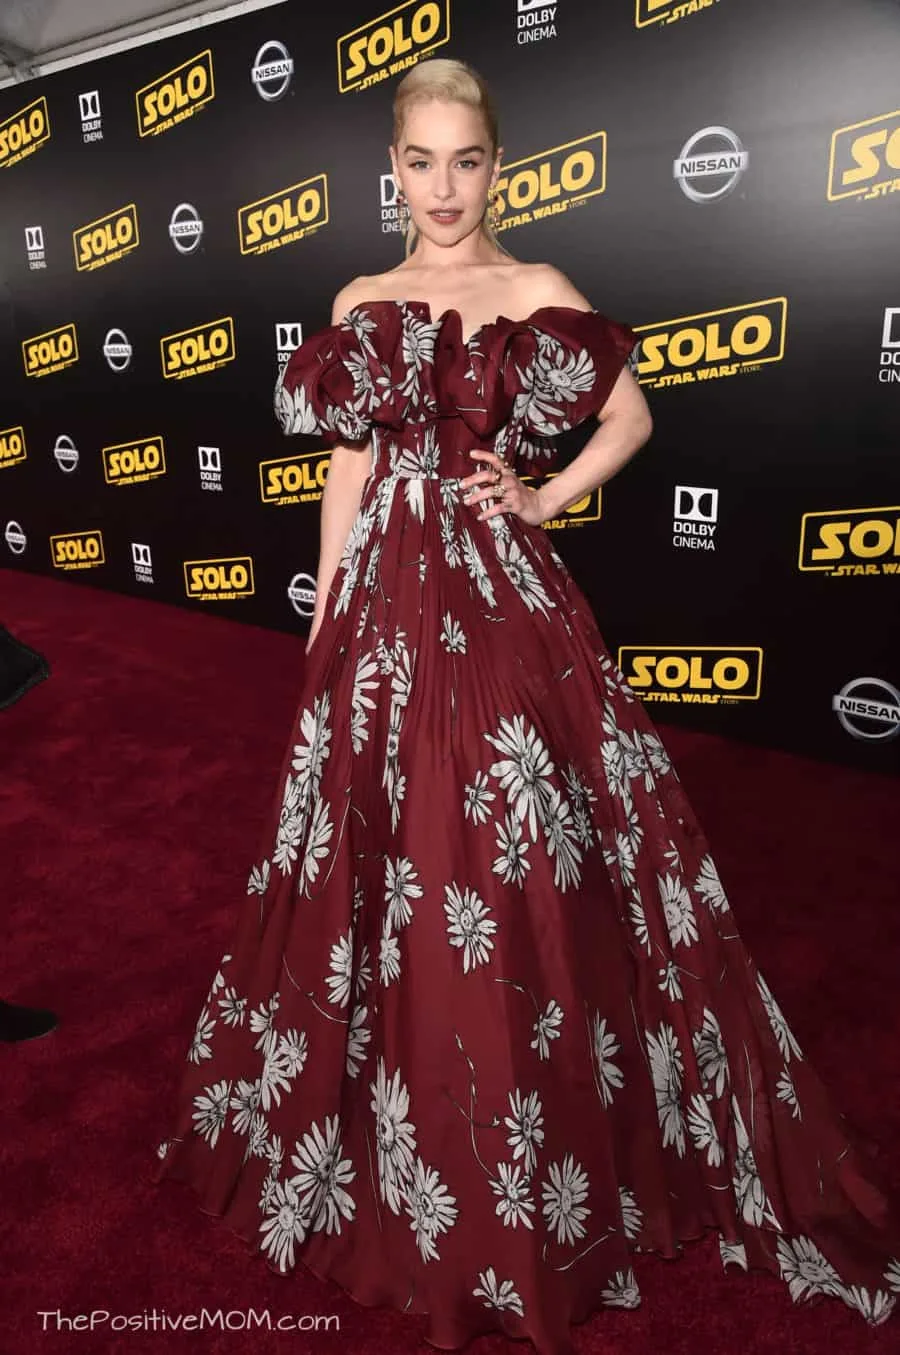 HOLLYWOOD, CA - MAY 10: Actor Emilia Clarke attends the world premiere of “Solo: A Star Wars Story” in Hollywood on May 10, 2018. (Photo by Alberto E. Rodriguez/Getty Images for Disney) *** Local Caption *** Emilia Clarke